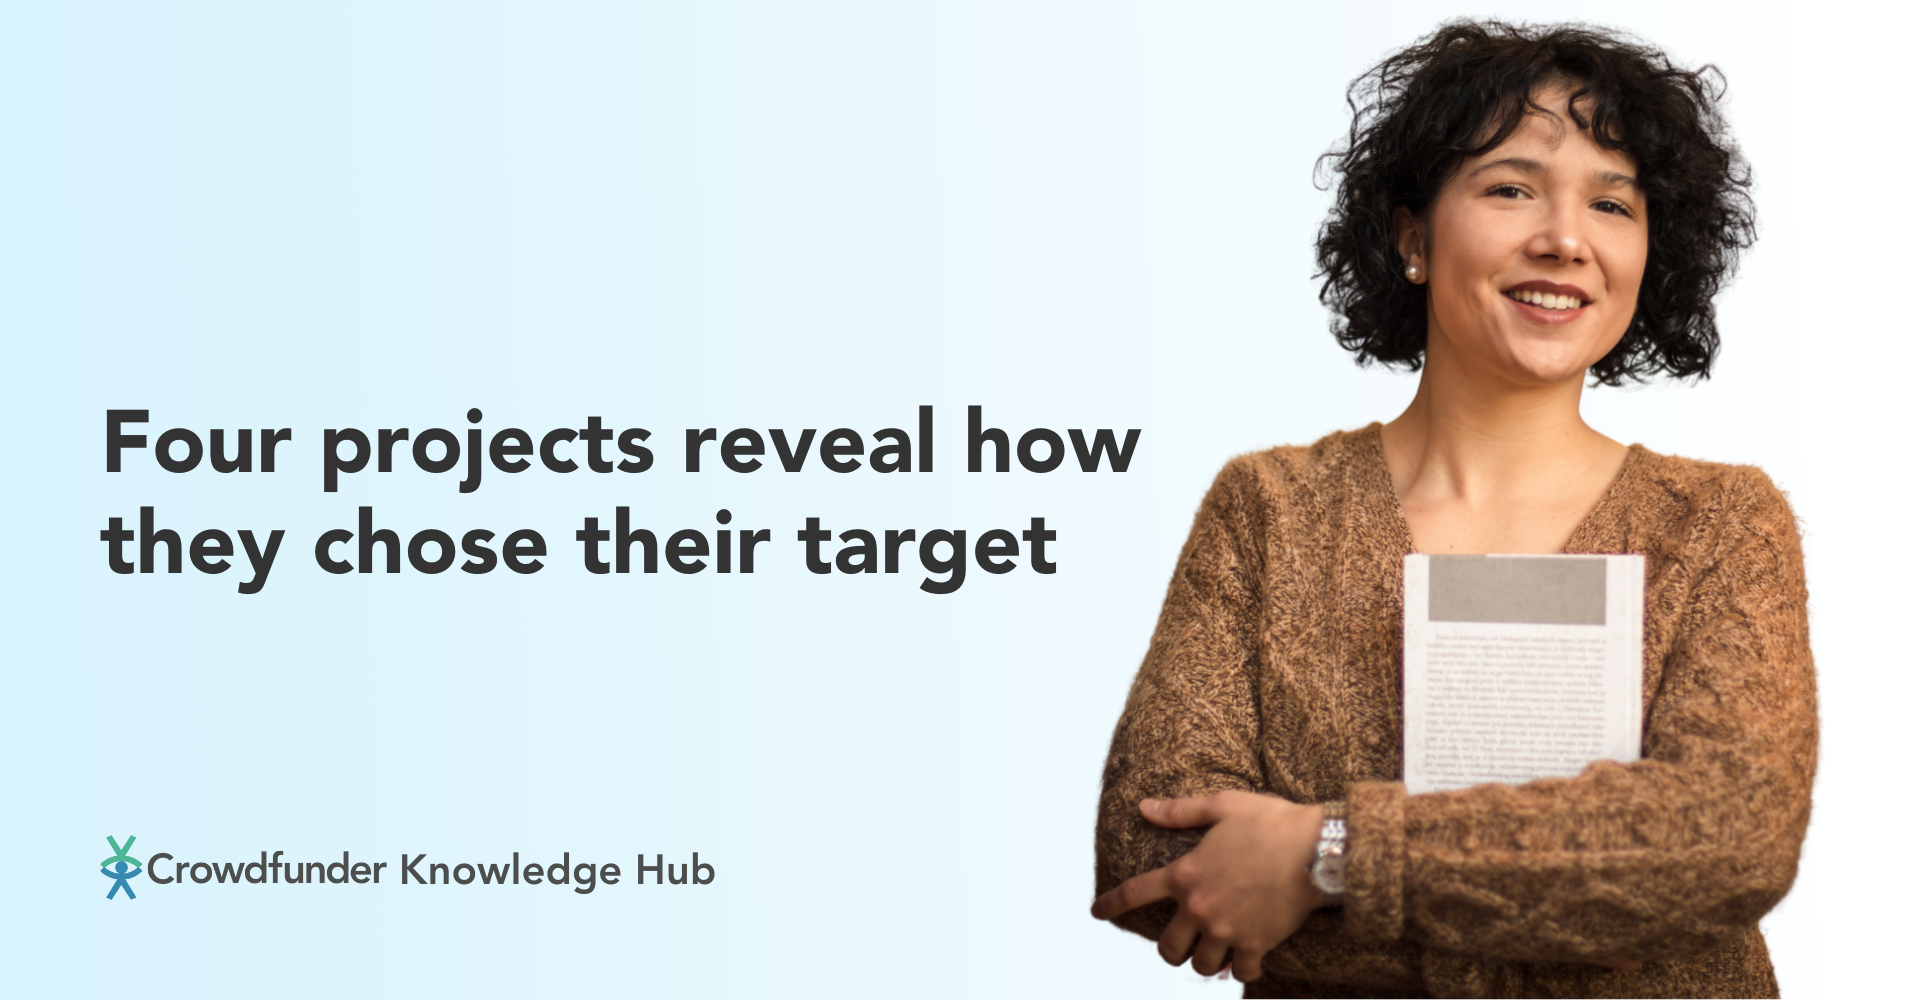 Four projects reveal how they chose their target